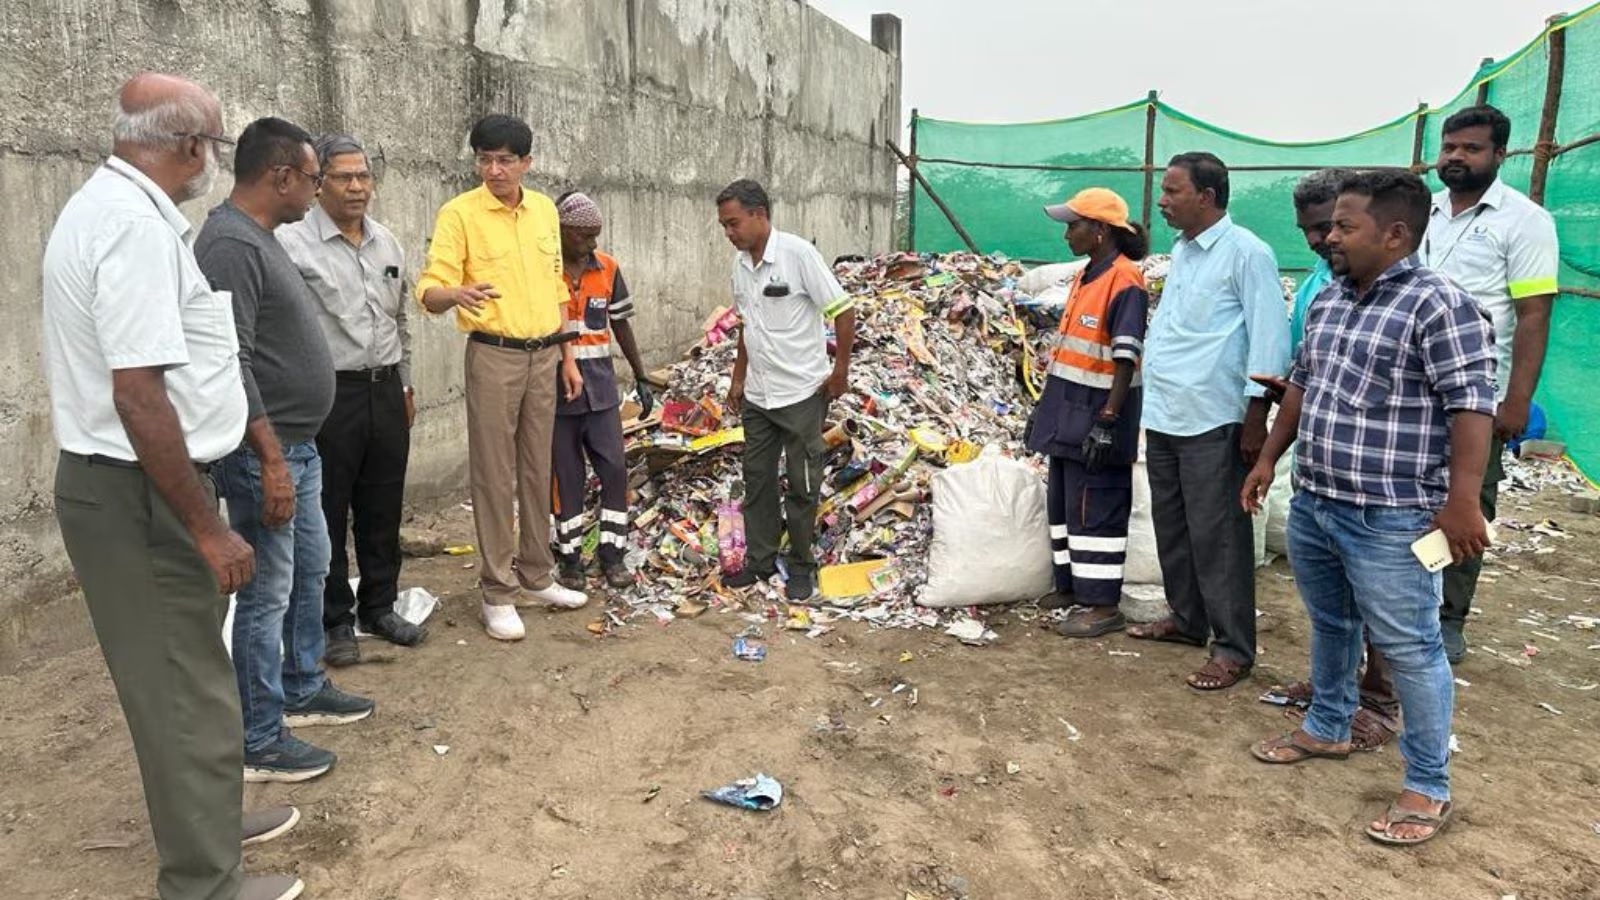 60,000 sanitation workers collecting 8,000 tonnes of cracker wastes in Tamil Nadu